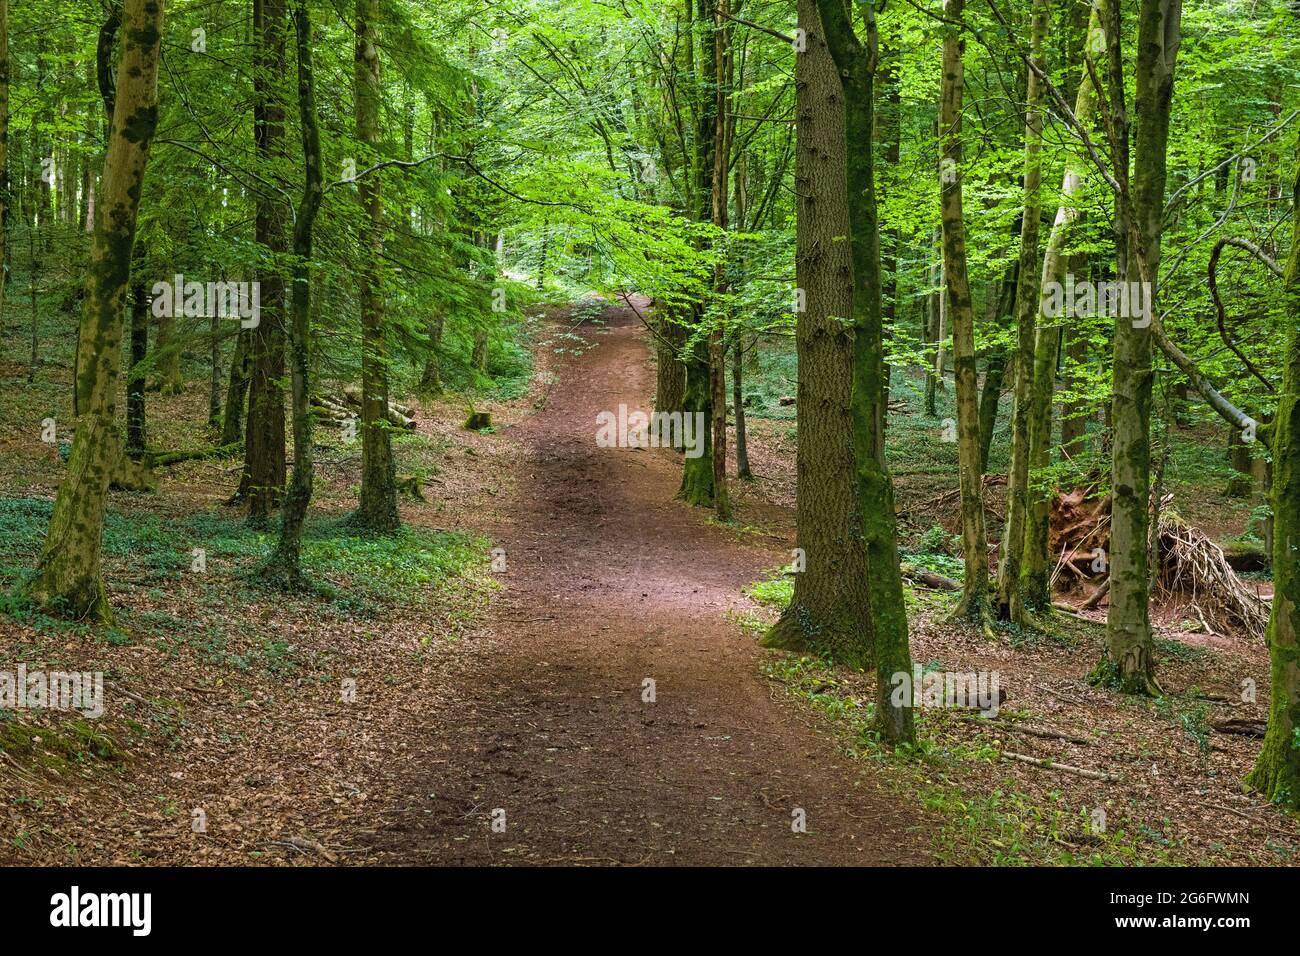 Fforest Fawr near Cardiff and one of many paths though the woods. Photographed in June this summer Stock Photo